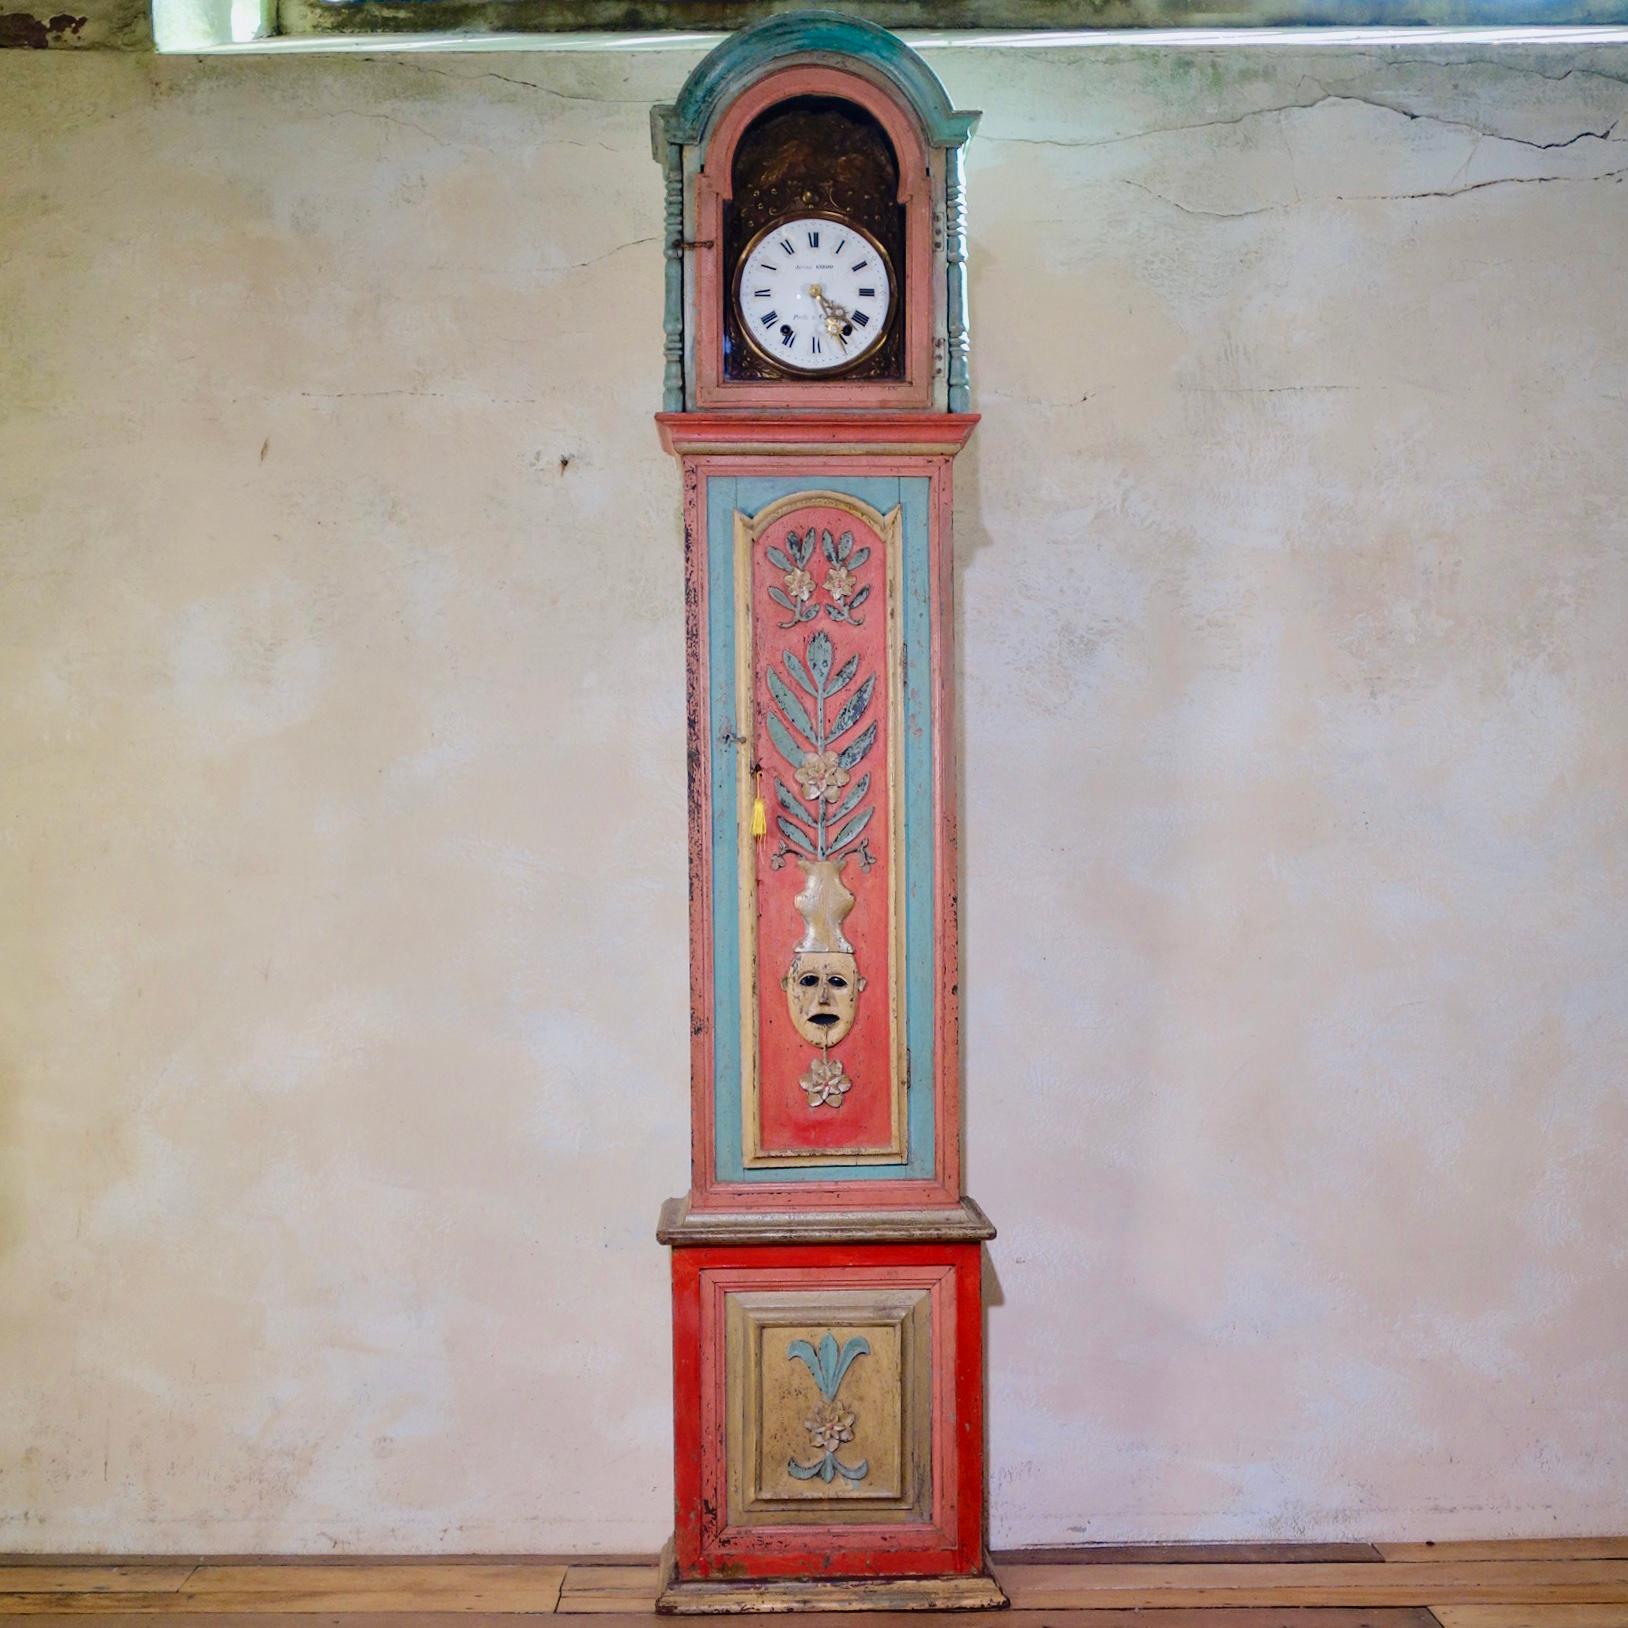 An 18th Century Portuguese painted chestnut longcase clock with hand-carved decorations. A very striking design featuring its original paint of vivid pastel-like colors. 

The eight-day birdcage movement striking on a bell, with an arched enameled